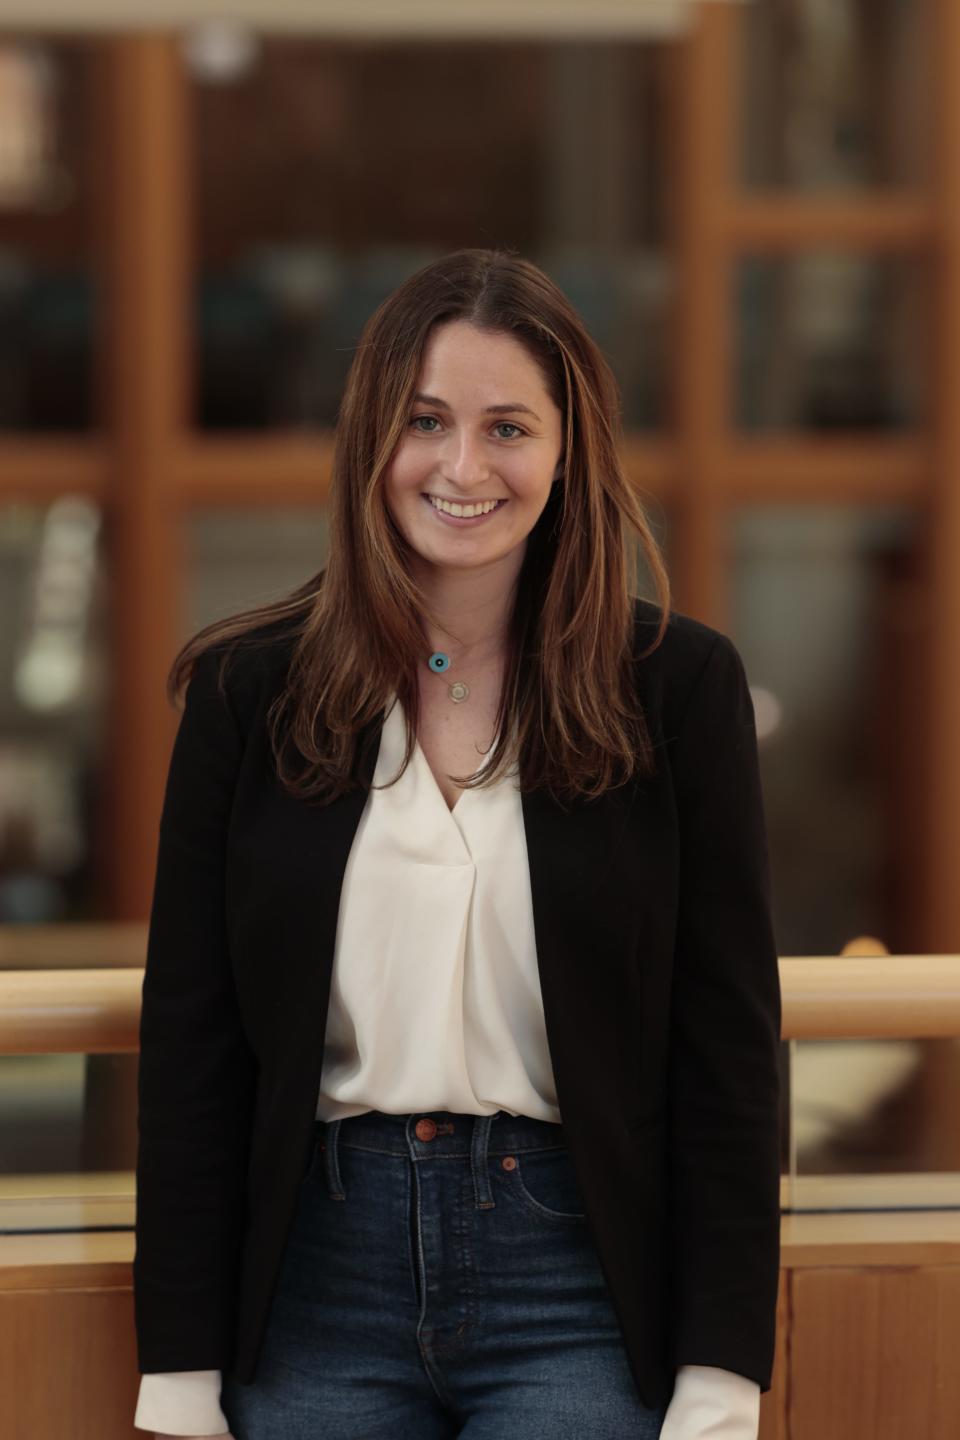 Lily Goldberg is a Columbus native and an Ohio State University graduate. She is currently pursuing her master's degree in public health at the University of North Carolina at Chapel Hill with a focus in health behavior.